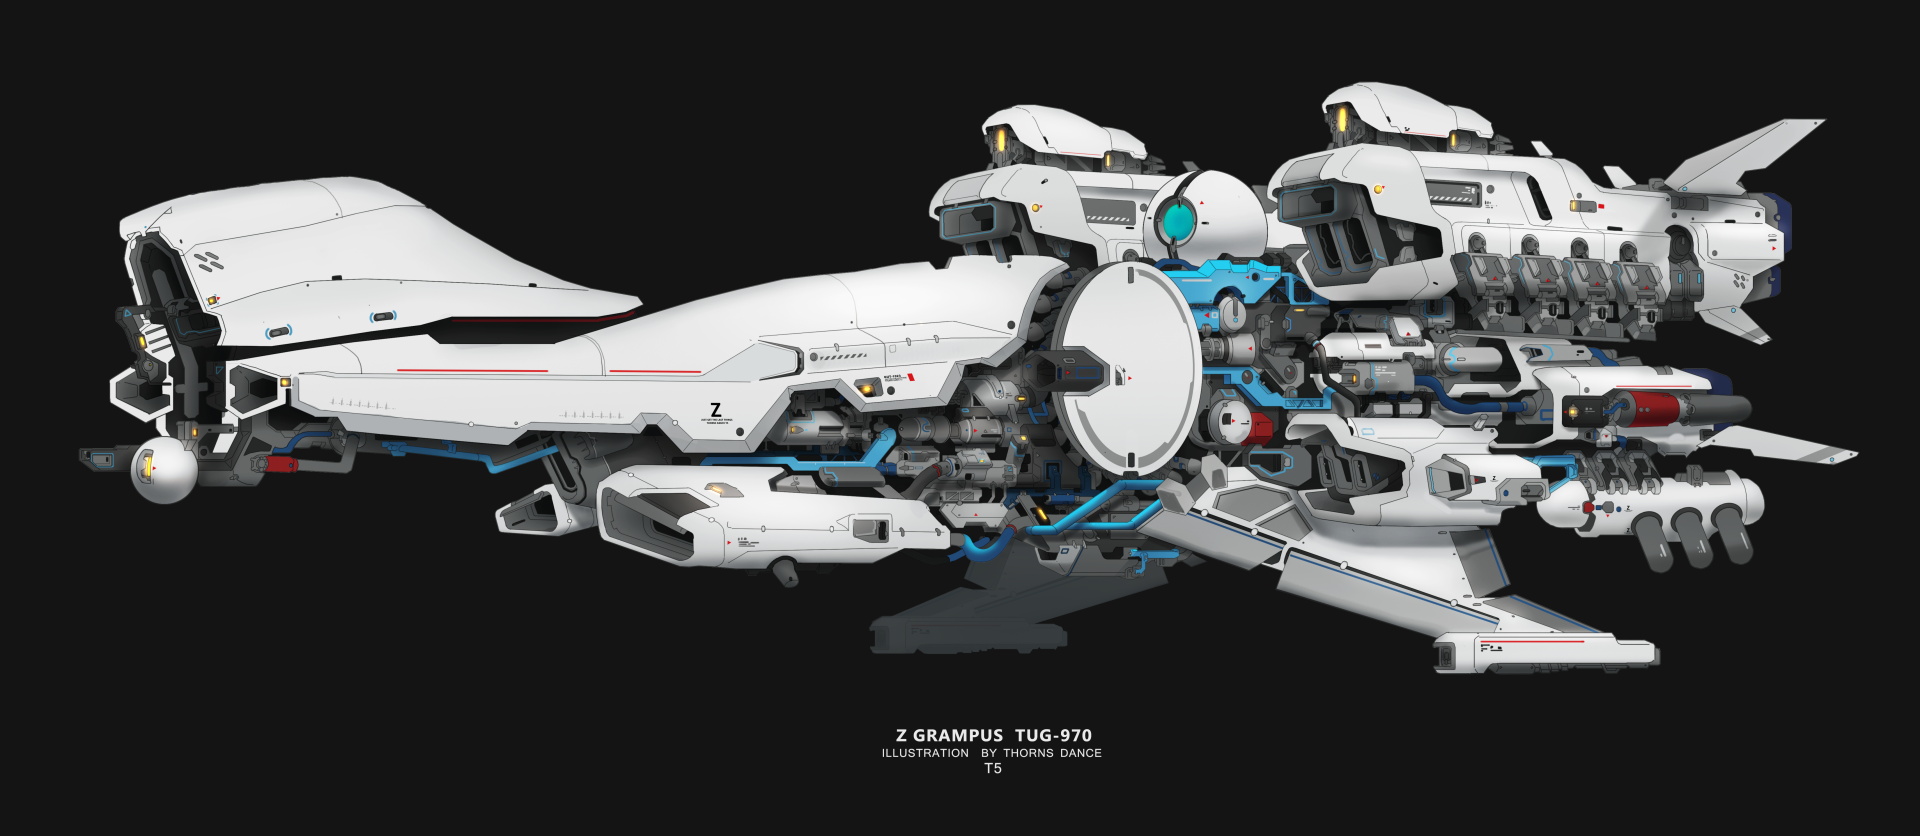 General 1920x836 T5 science fiction spaceship